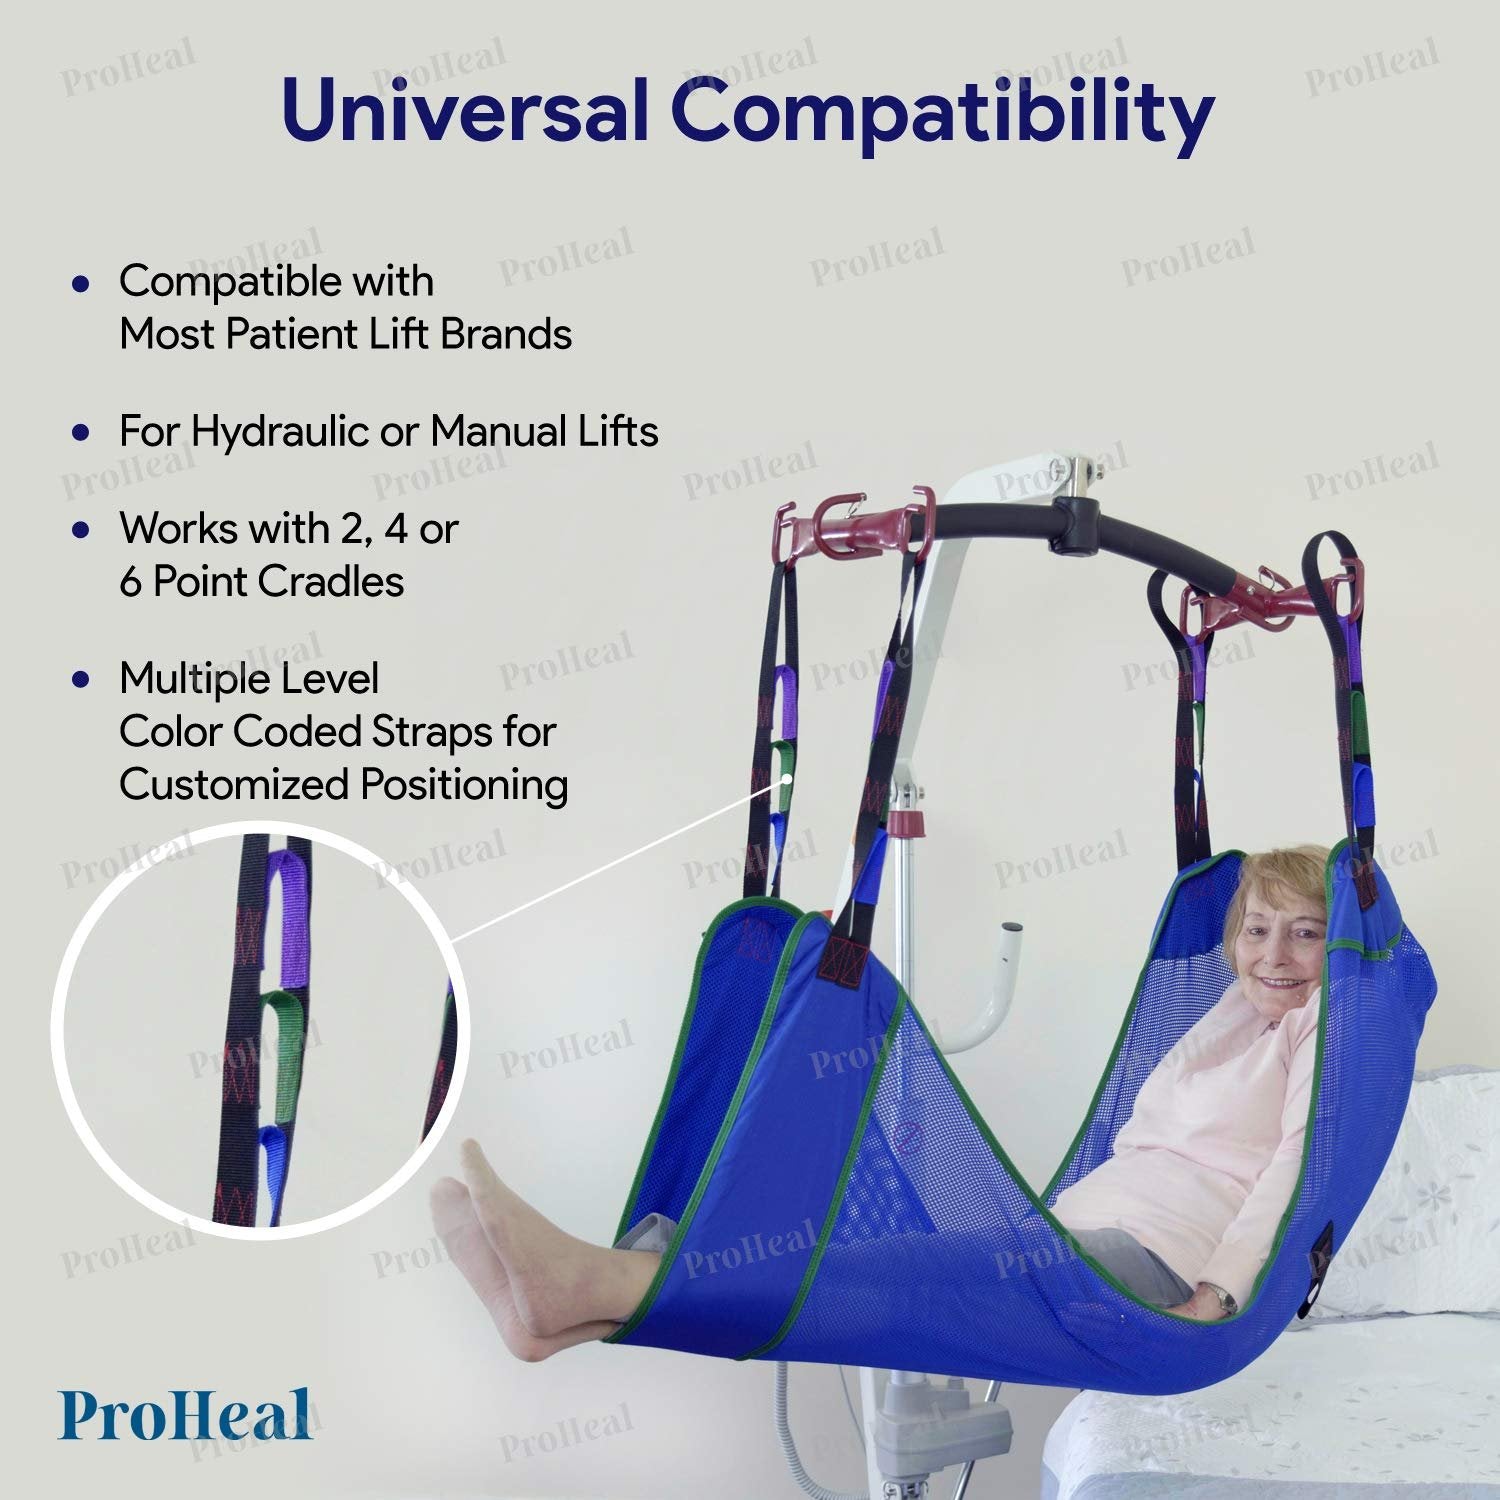 ProHeal Universal Full Body Mesh Lift Sling, X Large, 58"L x 27" - Polyester Slings for Patient Lifts - Compatible with Hoyer, Invacare, McKesson, Drive, Lumex, Joerns and More